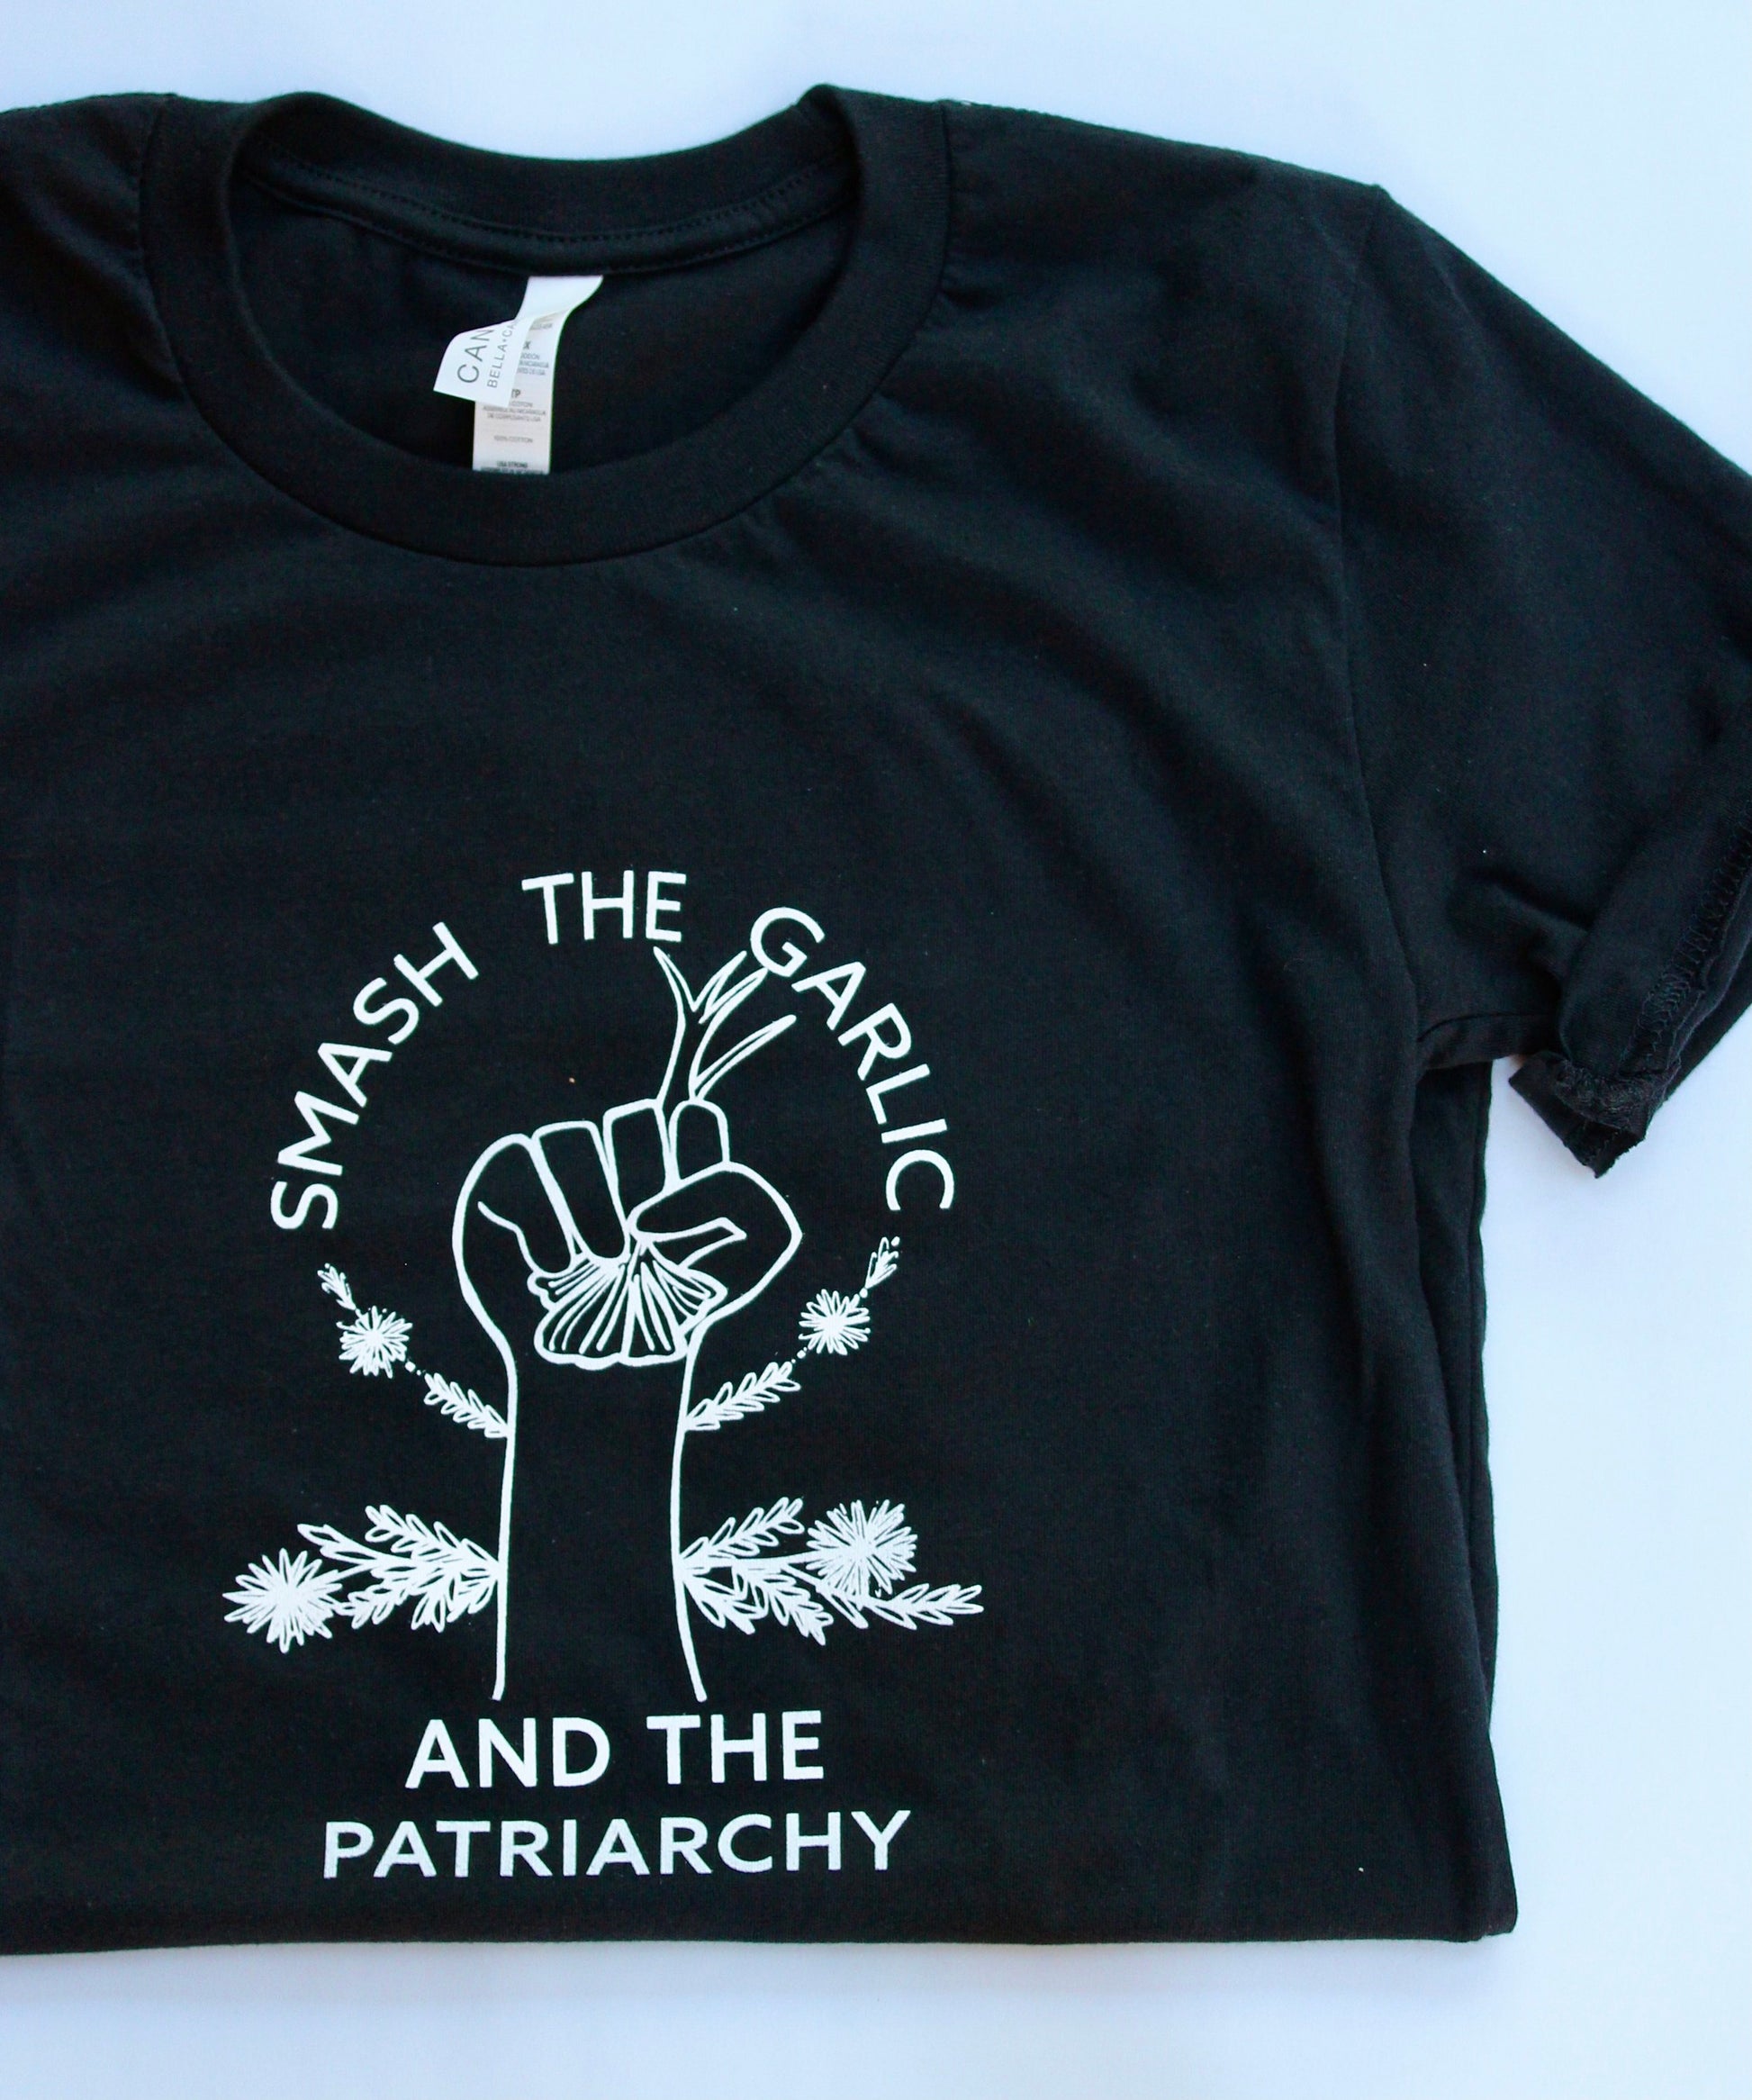 A black t-shirt reads "Smash the Garlic and the Patriarchy" with an illustration of a hand holding garlic in white